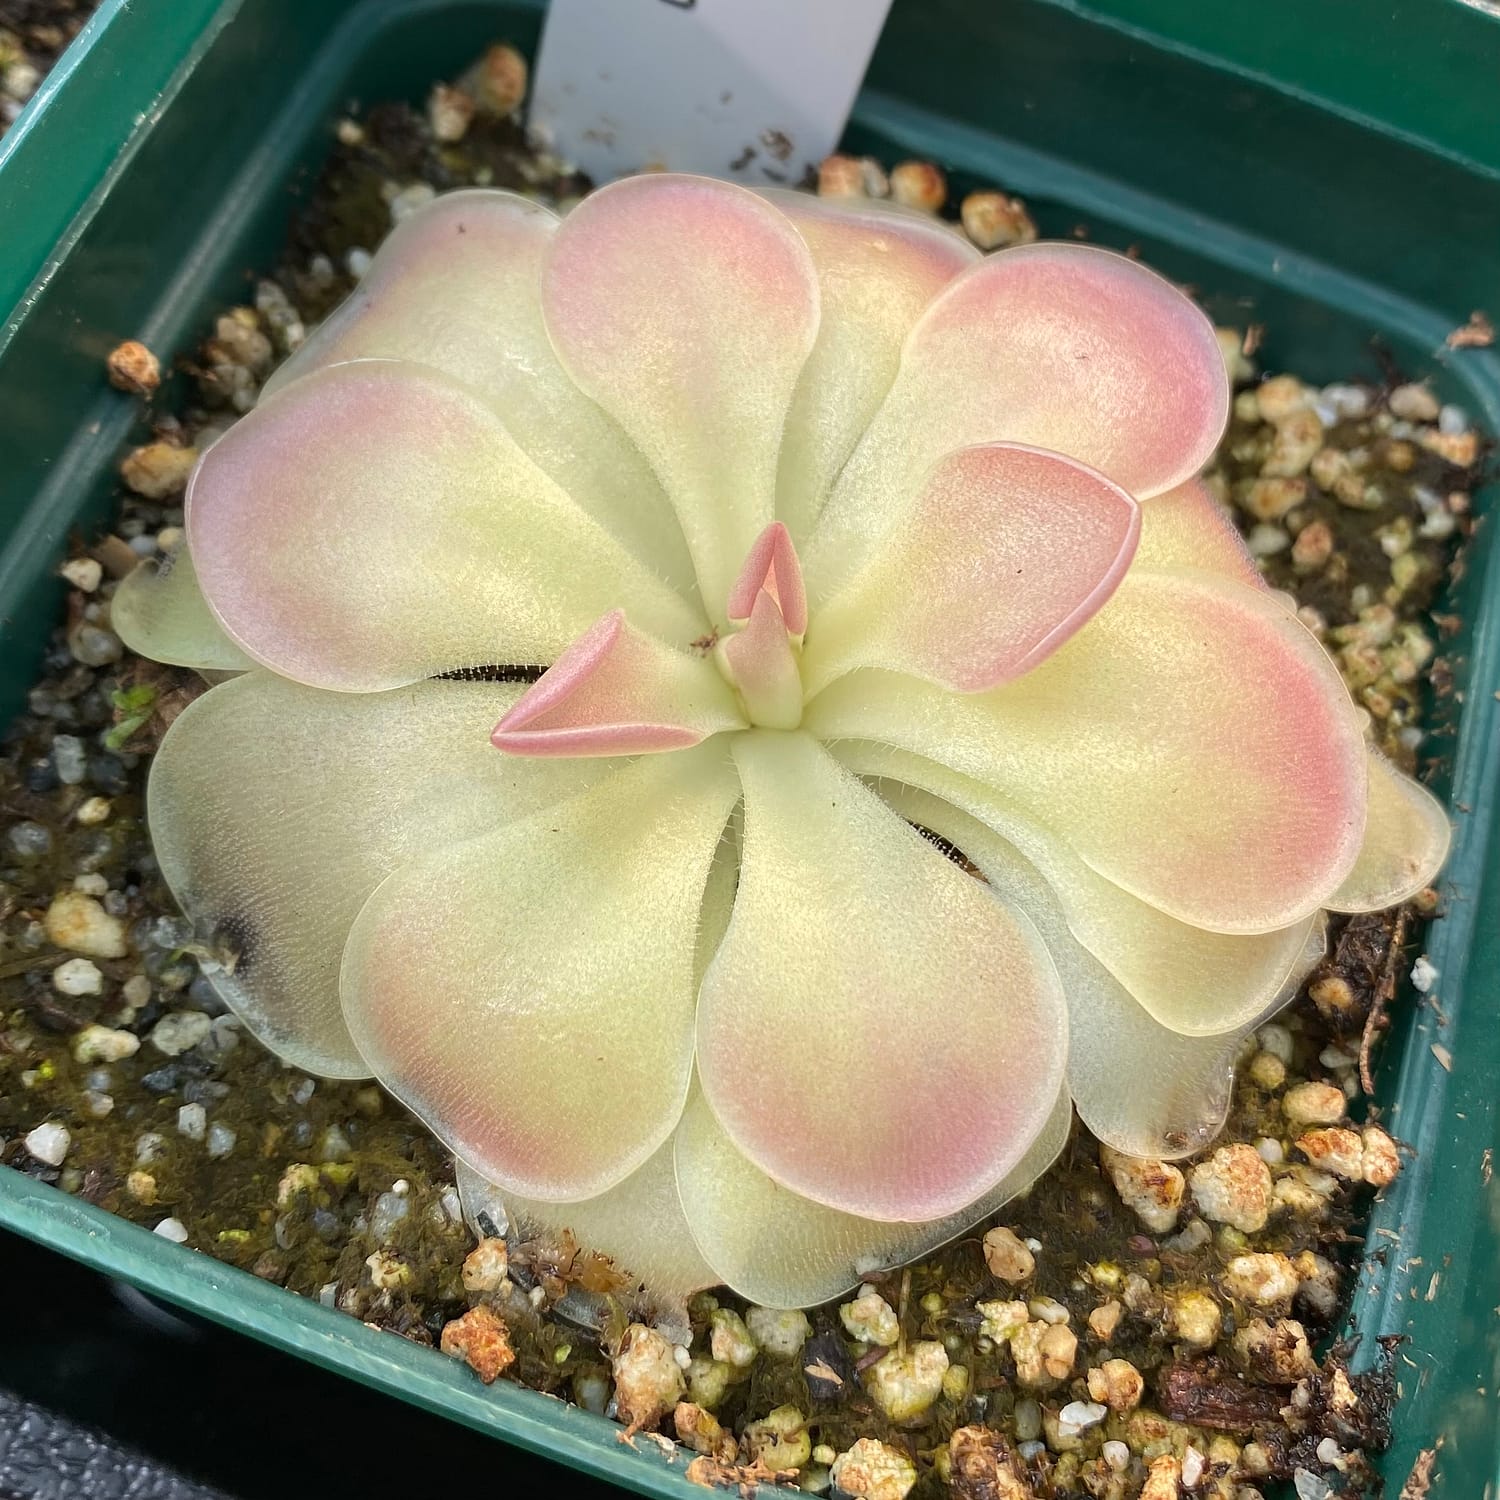 A Pinguicula “Kewensis” plant in a green container